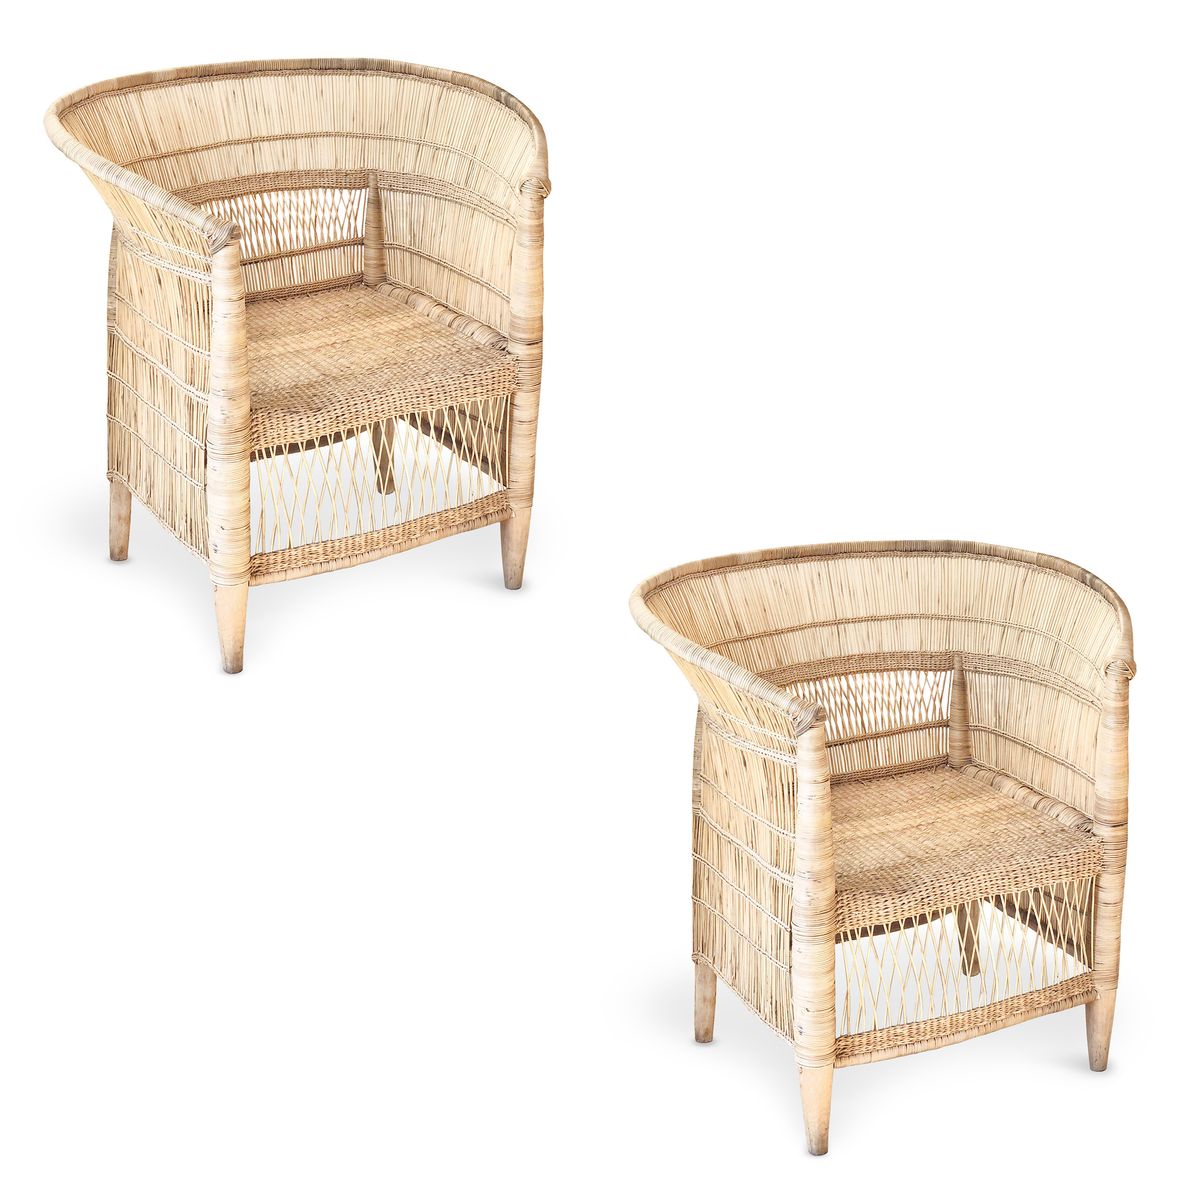 2 Traditional Malawi Cane Chairs